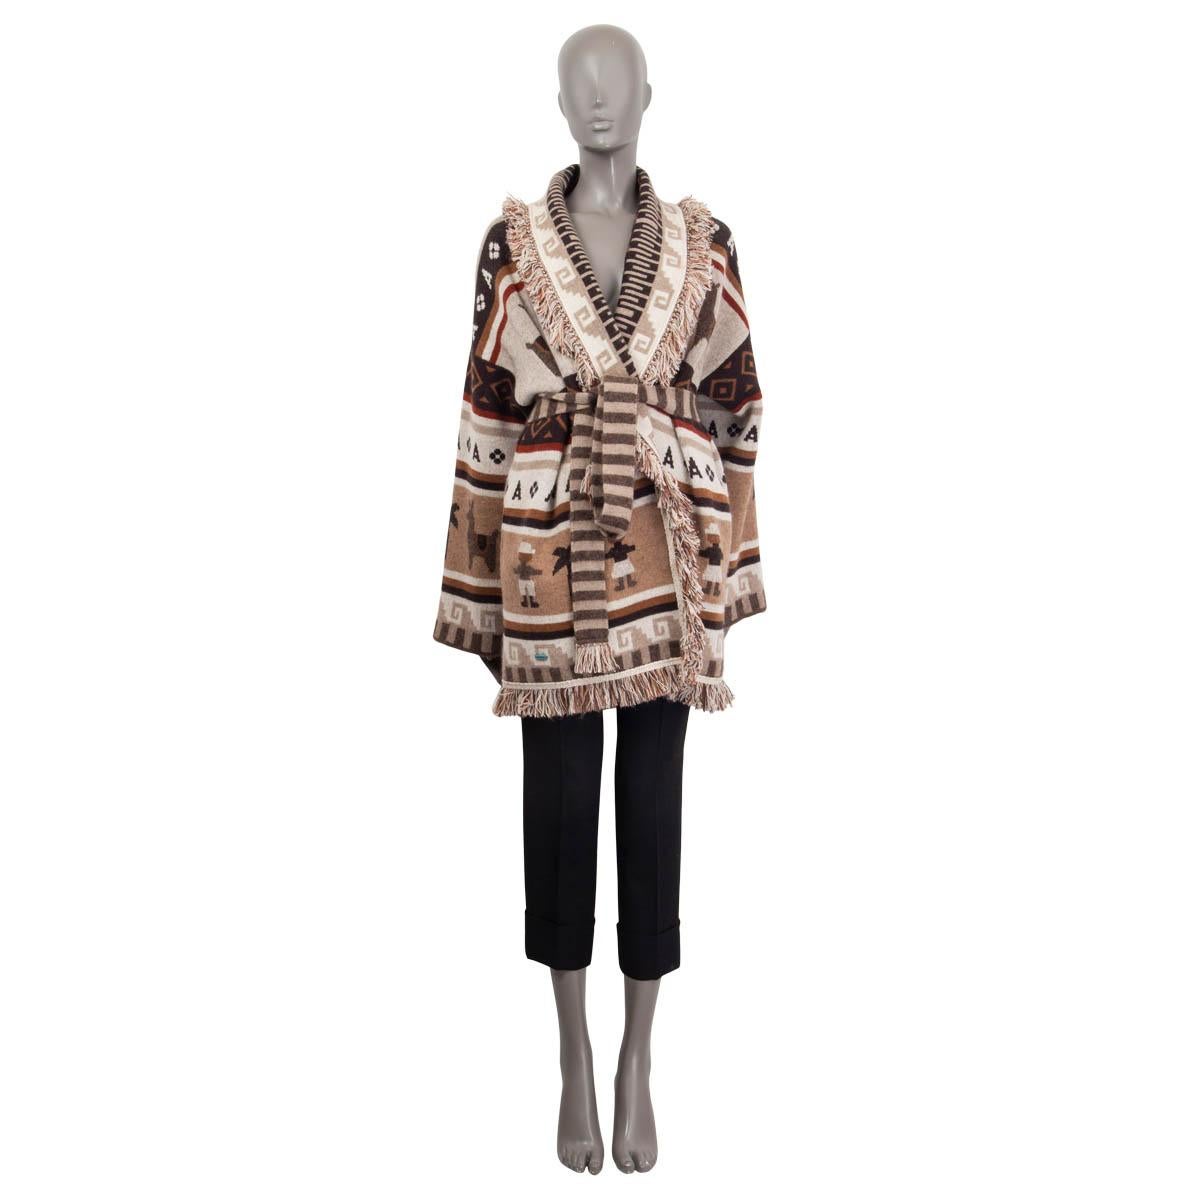 100% authentic Alanui 'The Long Way To Ushuaia' open belted cardigan in beige, brown, black, ecru and red cashmere (87%), alpaca (6%) and polyamide (1%). Features a detachable belt and tasseled trims. Has two slit pockets at the sides. Unlined.